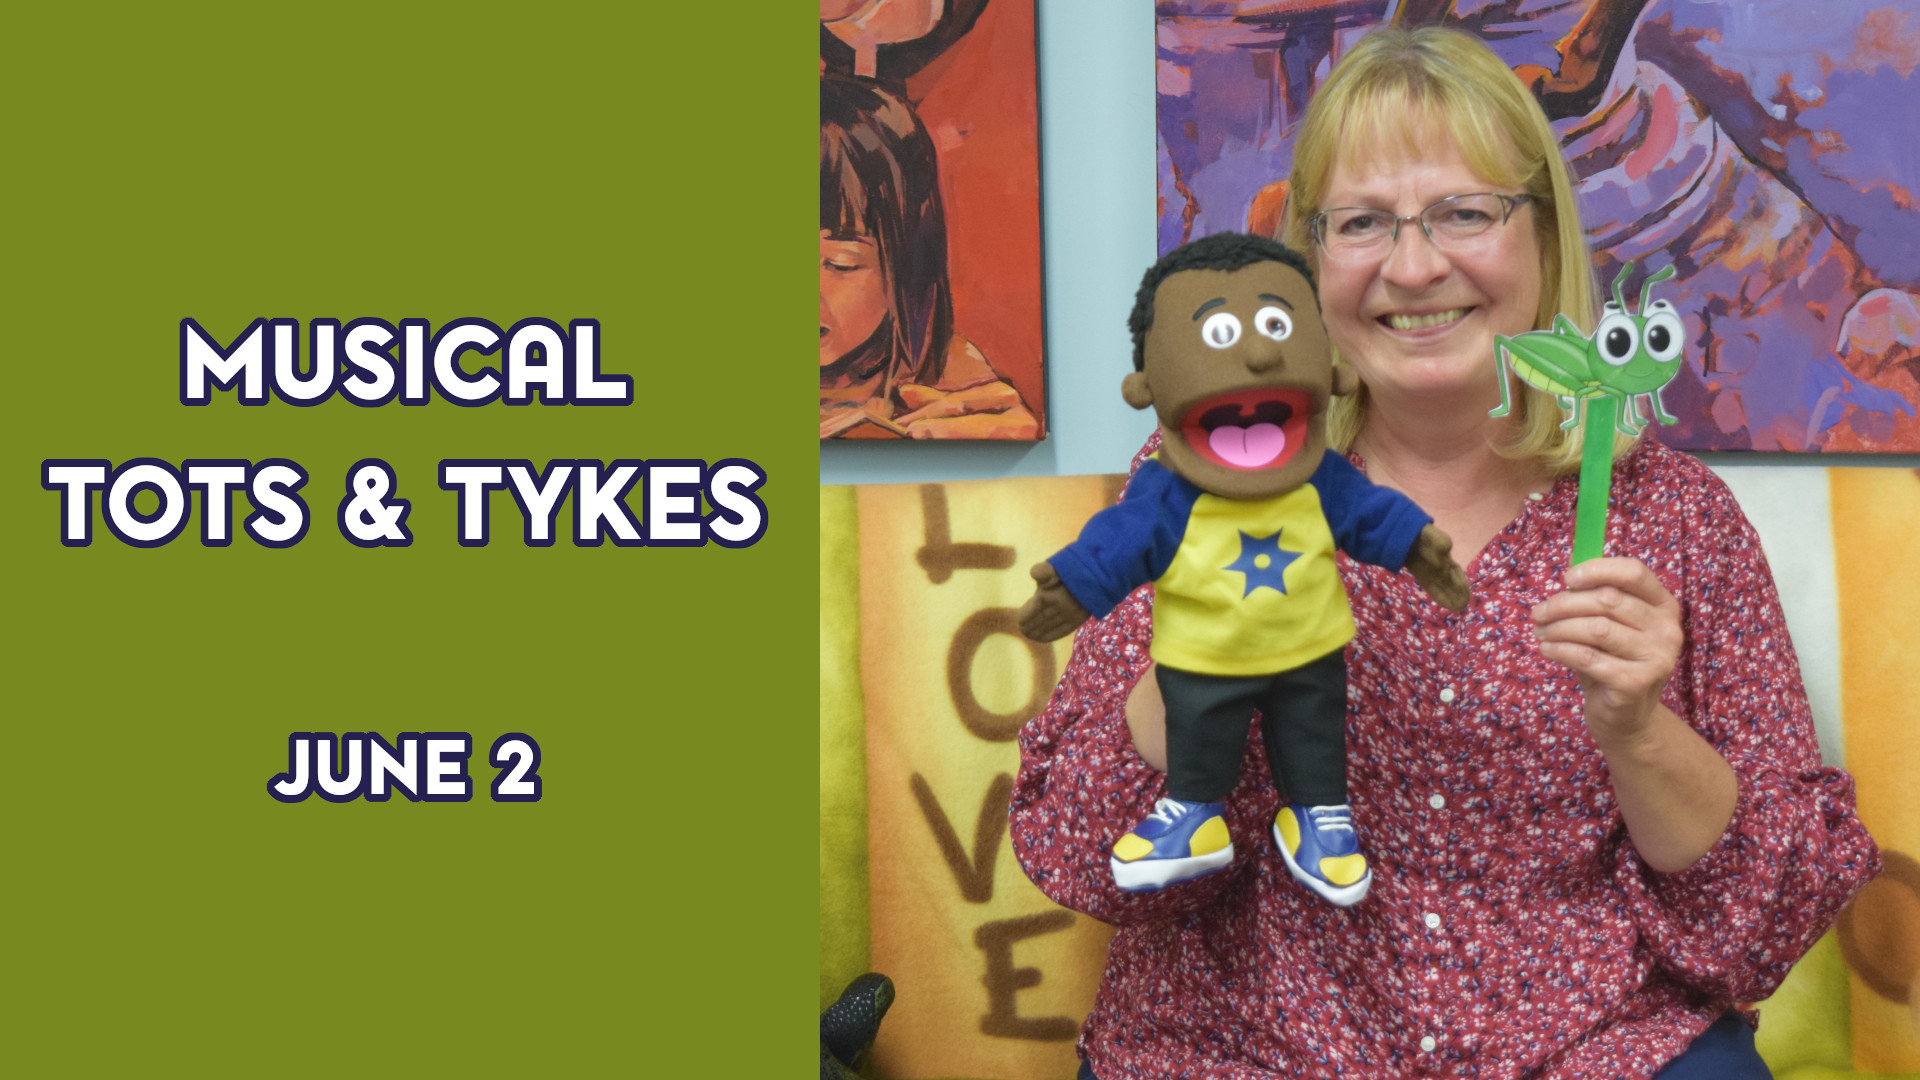 A woman holds puppets next to the text "Musical Tots & Tykes June 2"